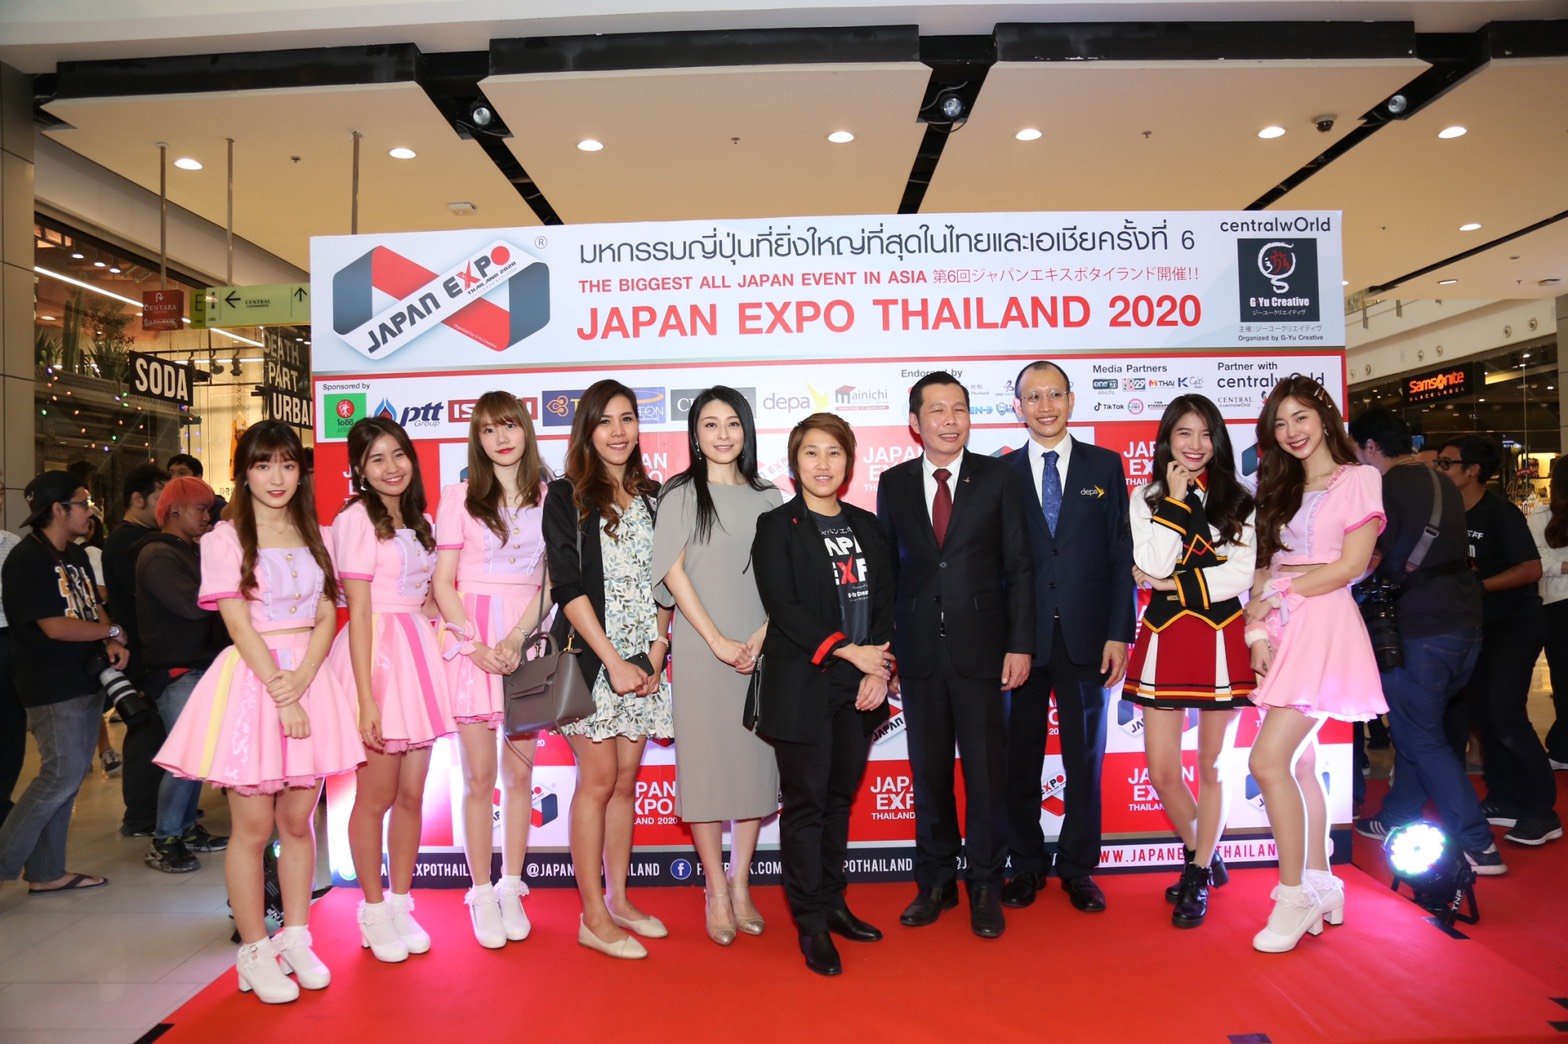 JAPAN EXPO THAILAND 2020 Press Conference